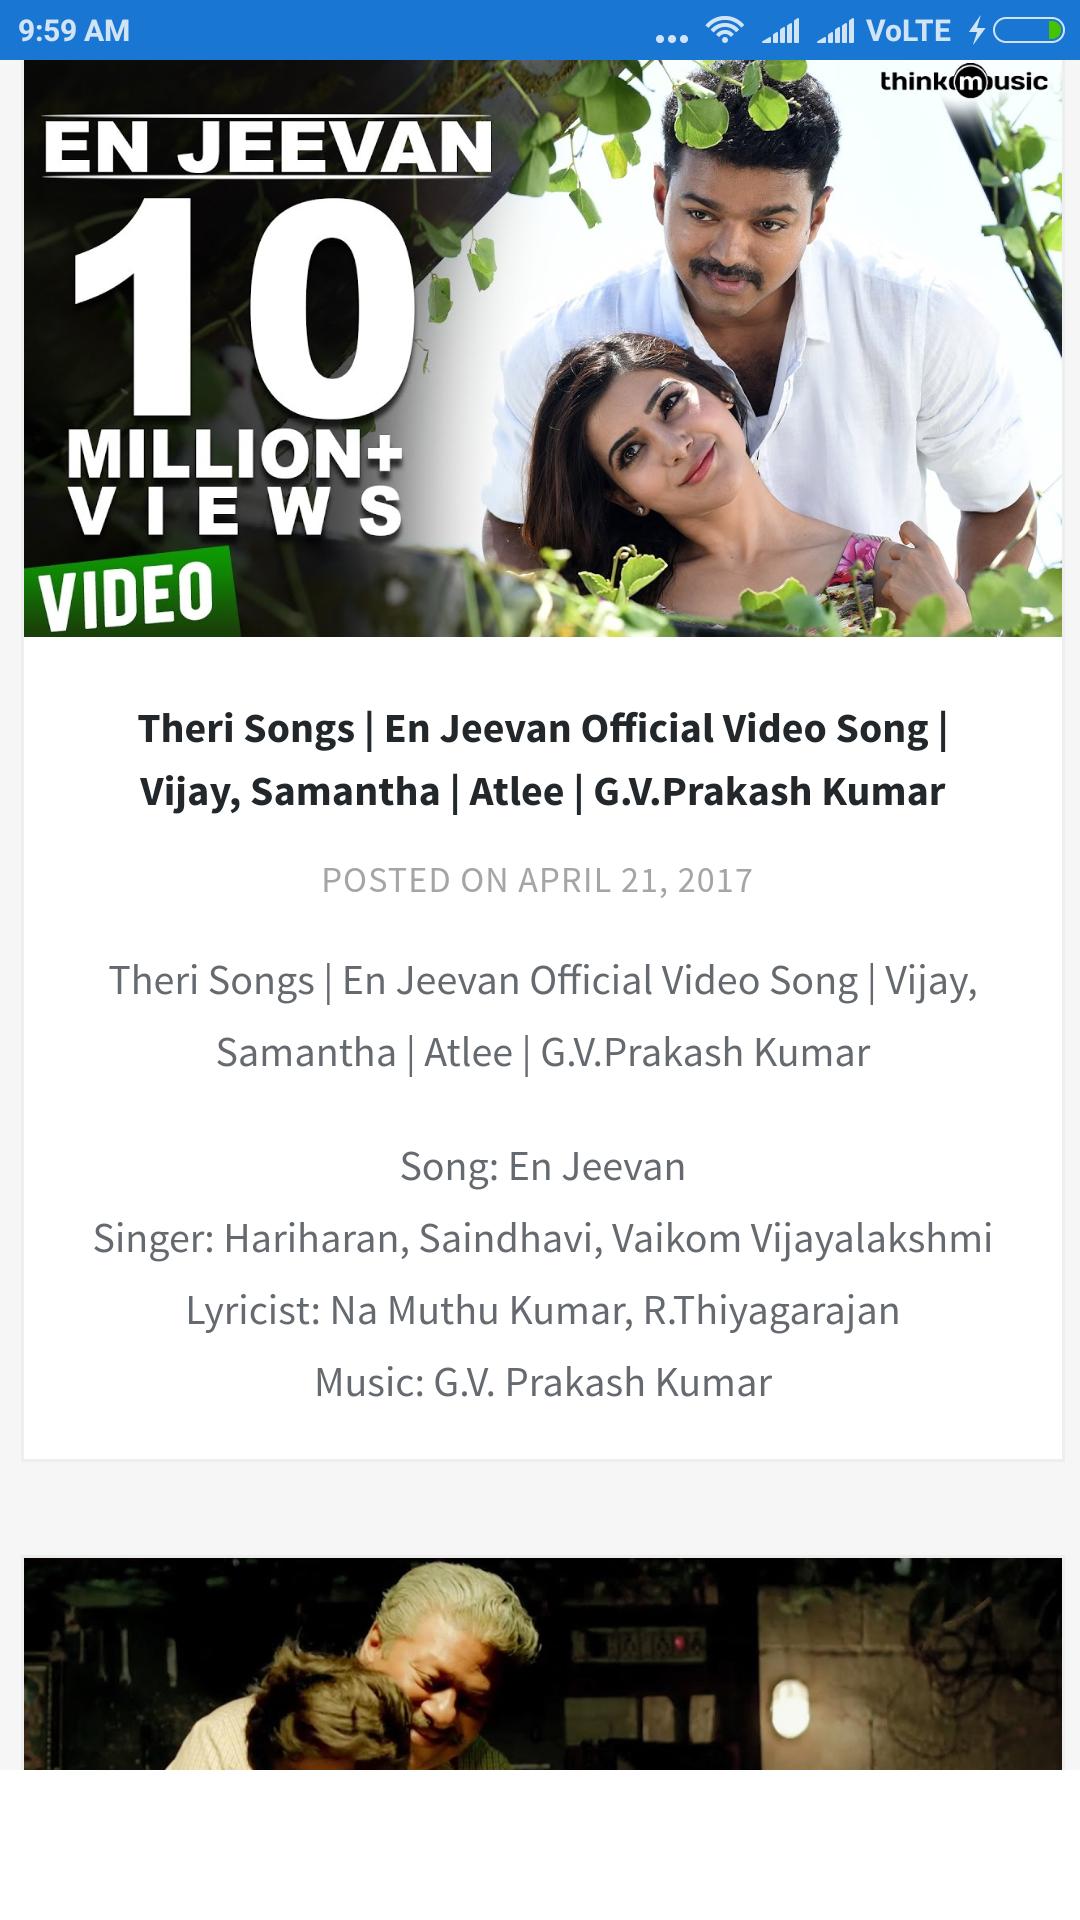 Tamil Songs Video For Android Apk Download Vijay songs download, vijay hits, vijay movie song download, best of actor vijay song download, thalapathy vijay song download, vijay masstamilan, kuttyweb, isaimini. tamil songs video for android apk